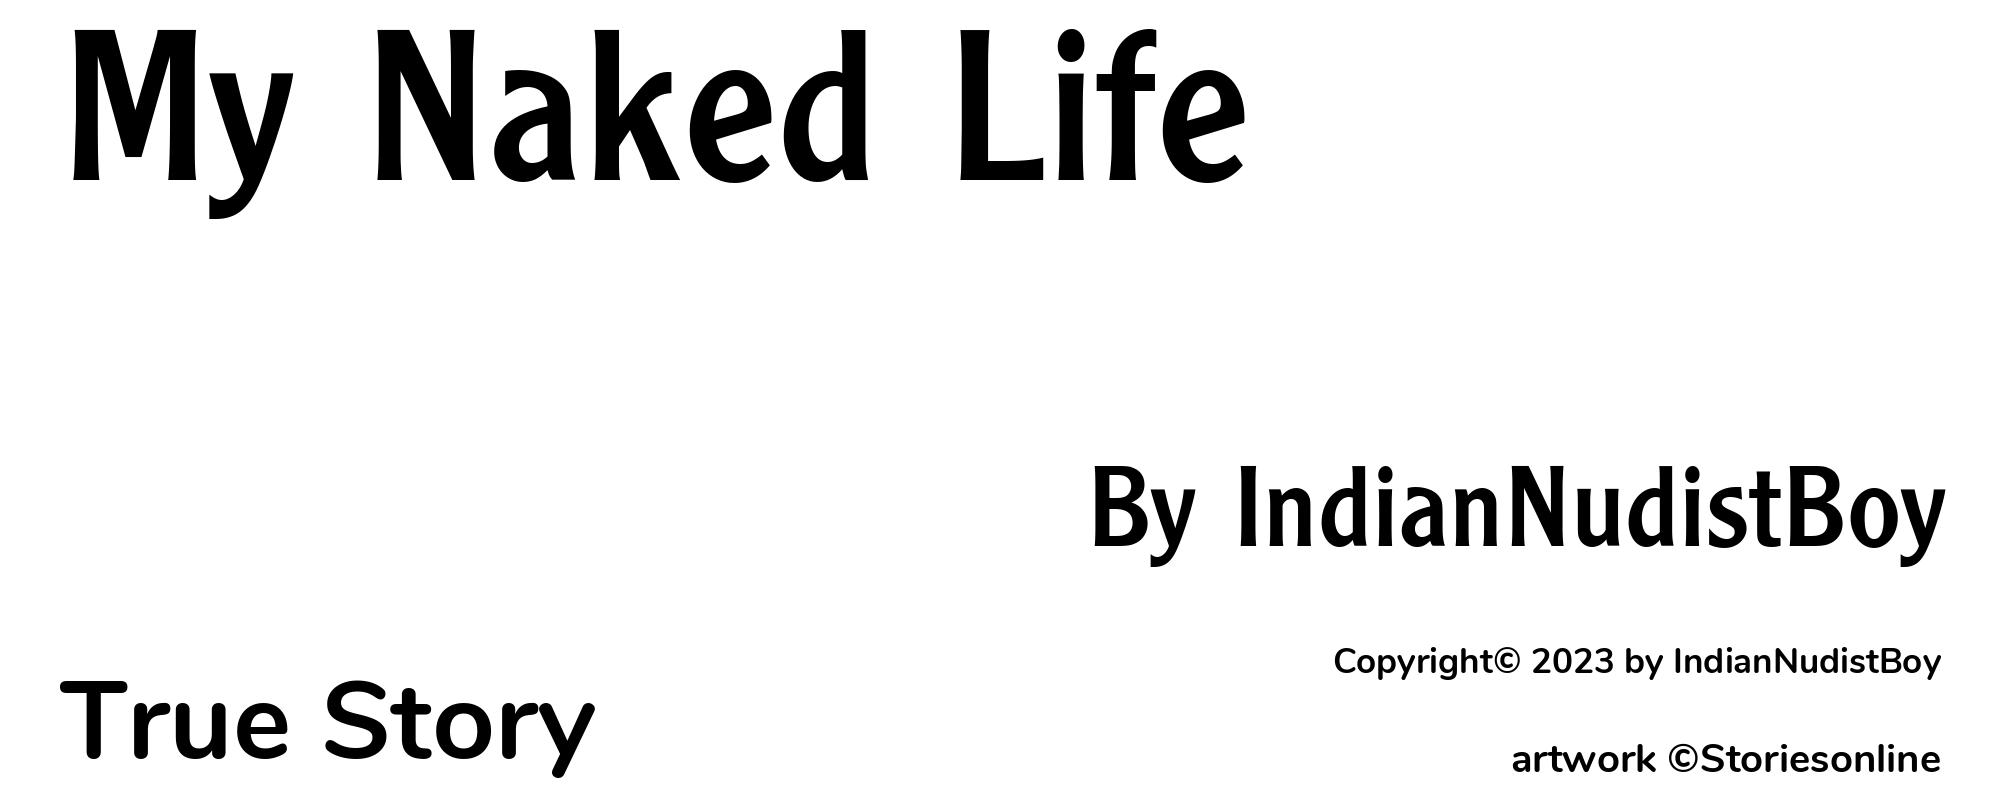 My Naked Life - Cover